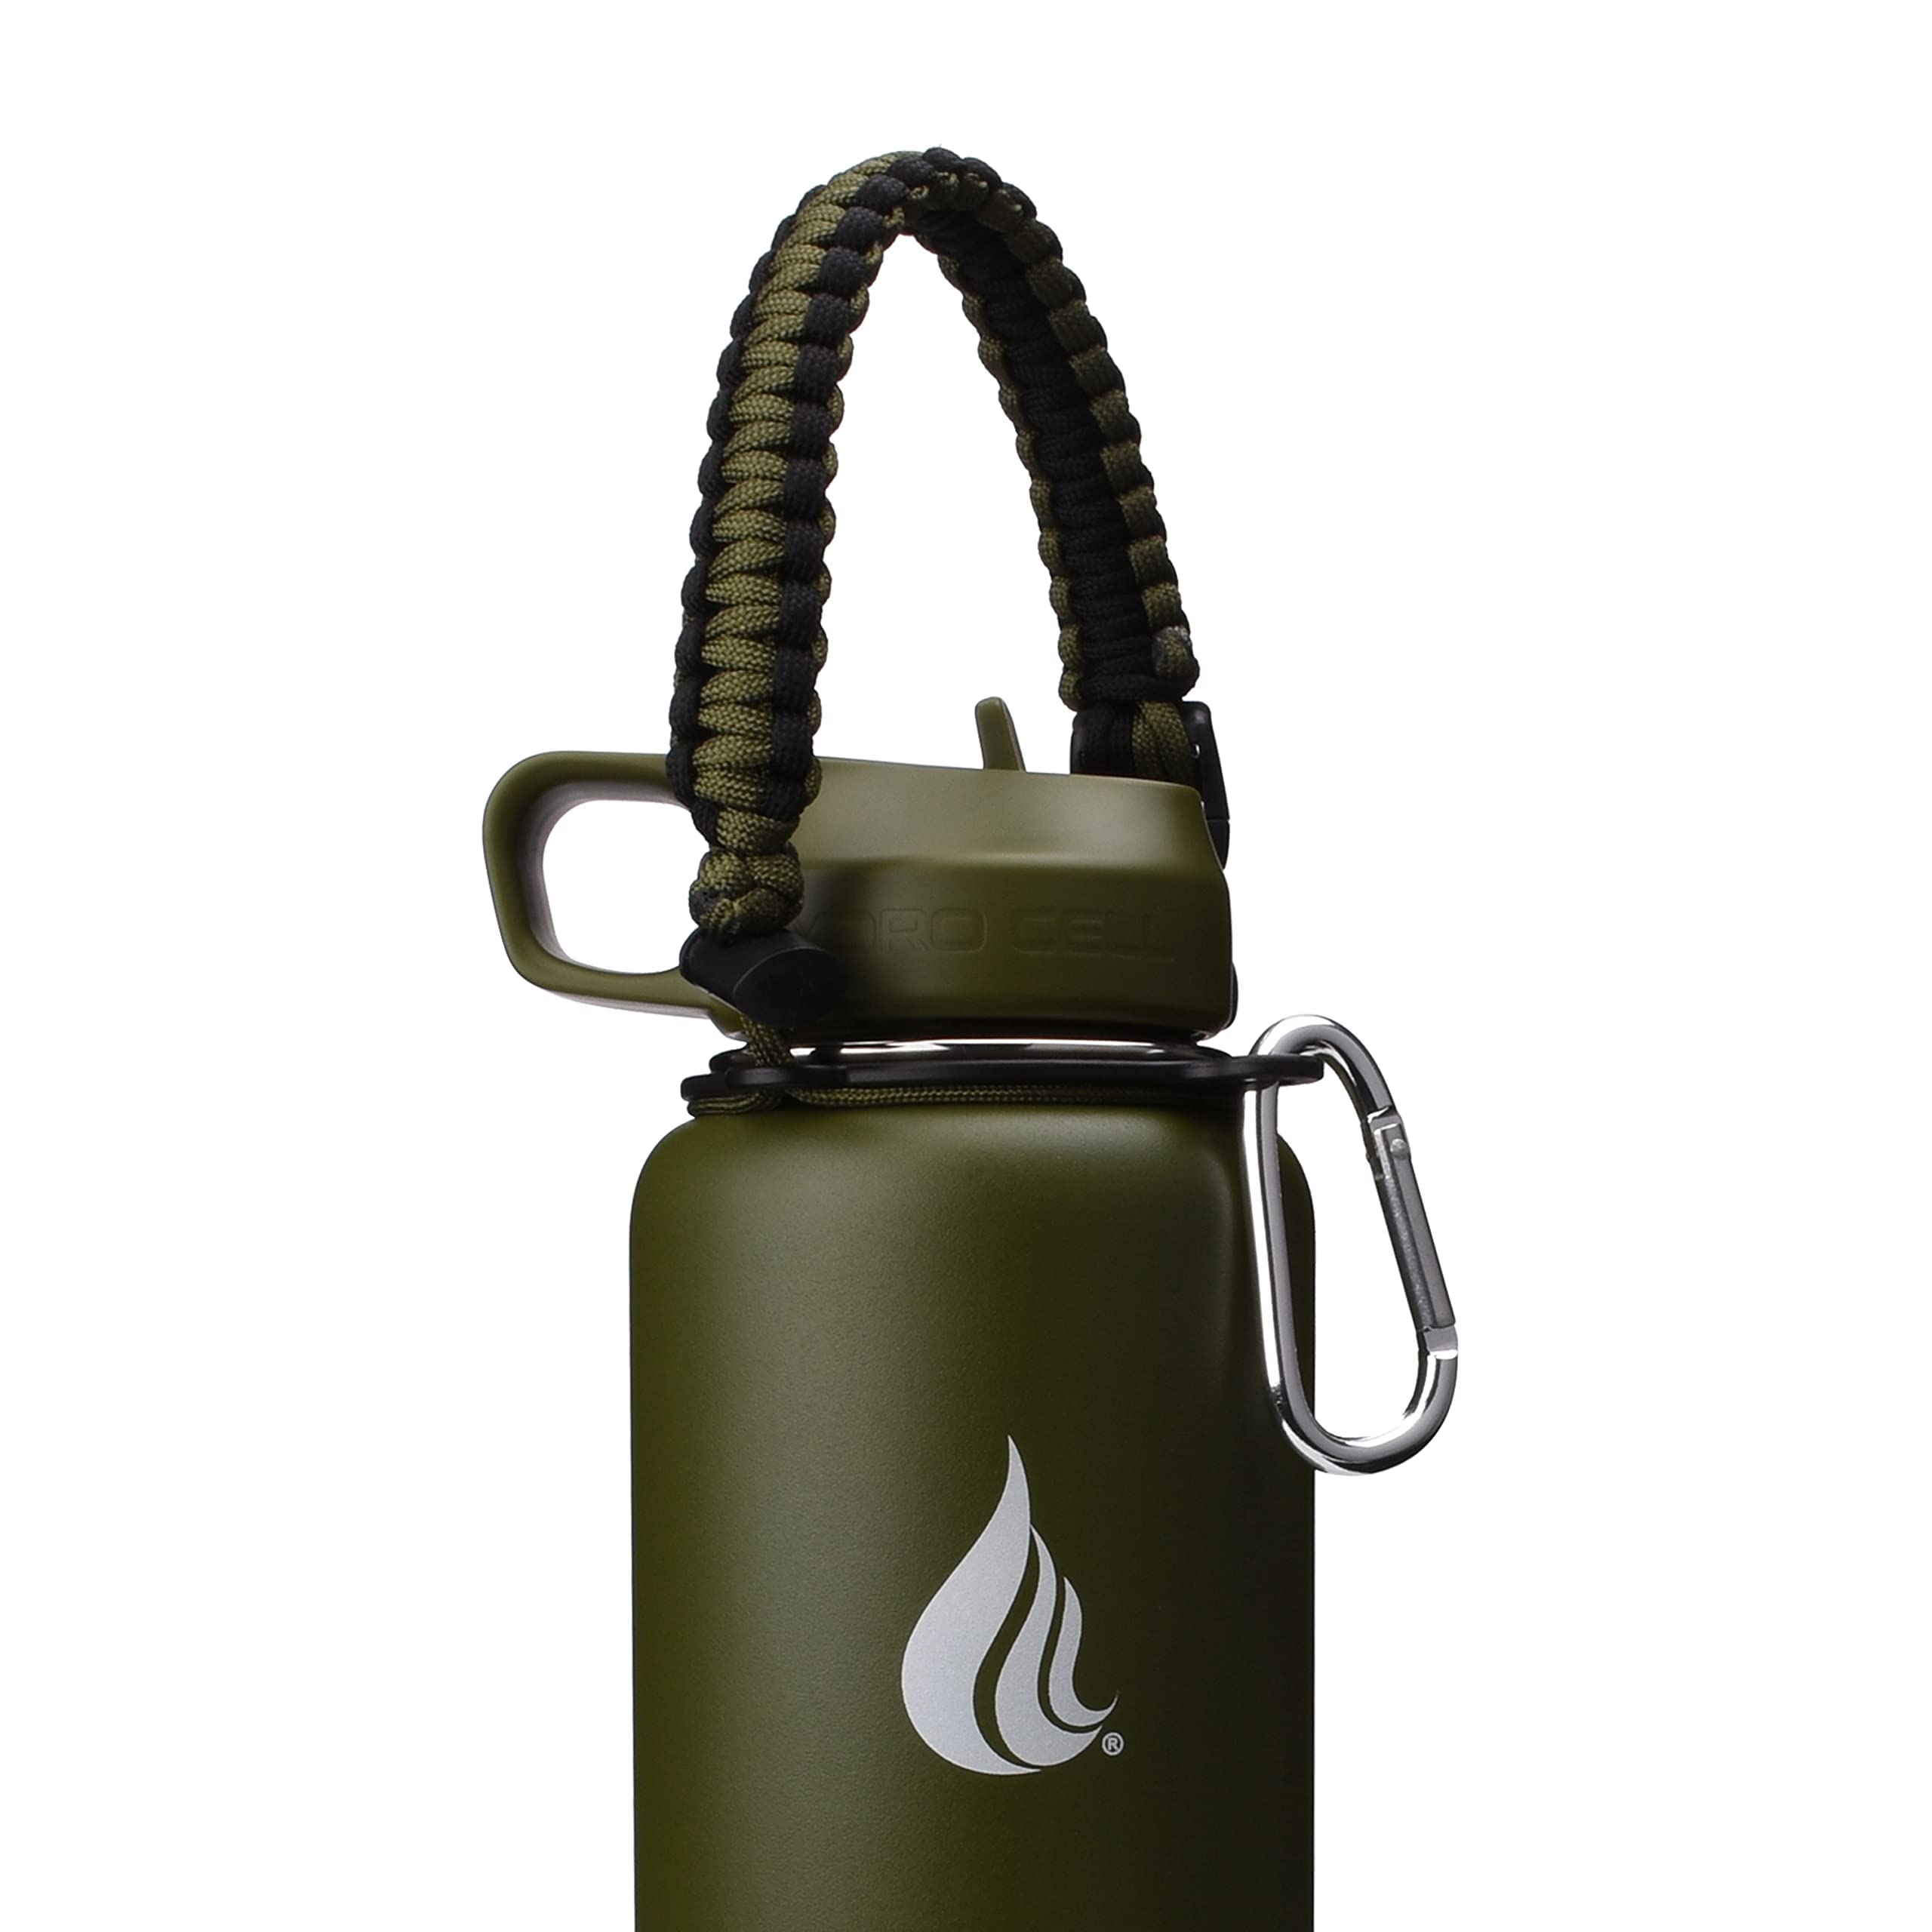 A Paracord Handle for Hydro Flask Standard Mouth Bottles